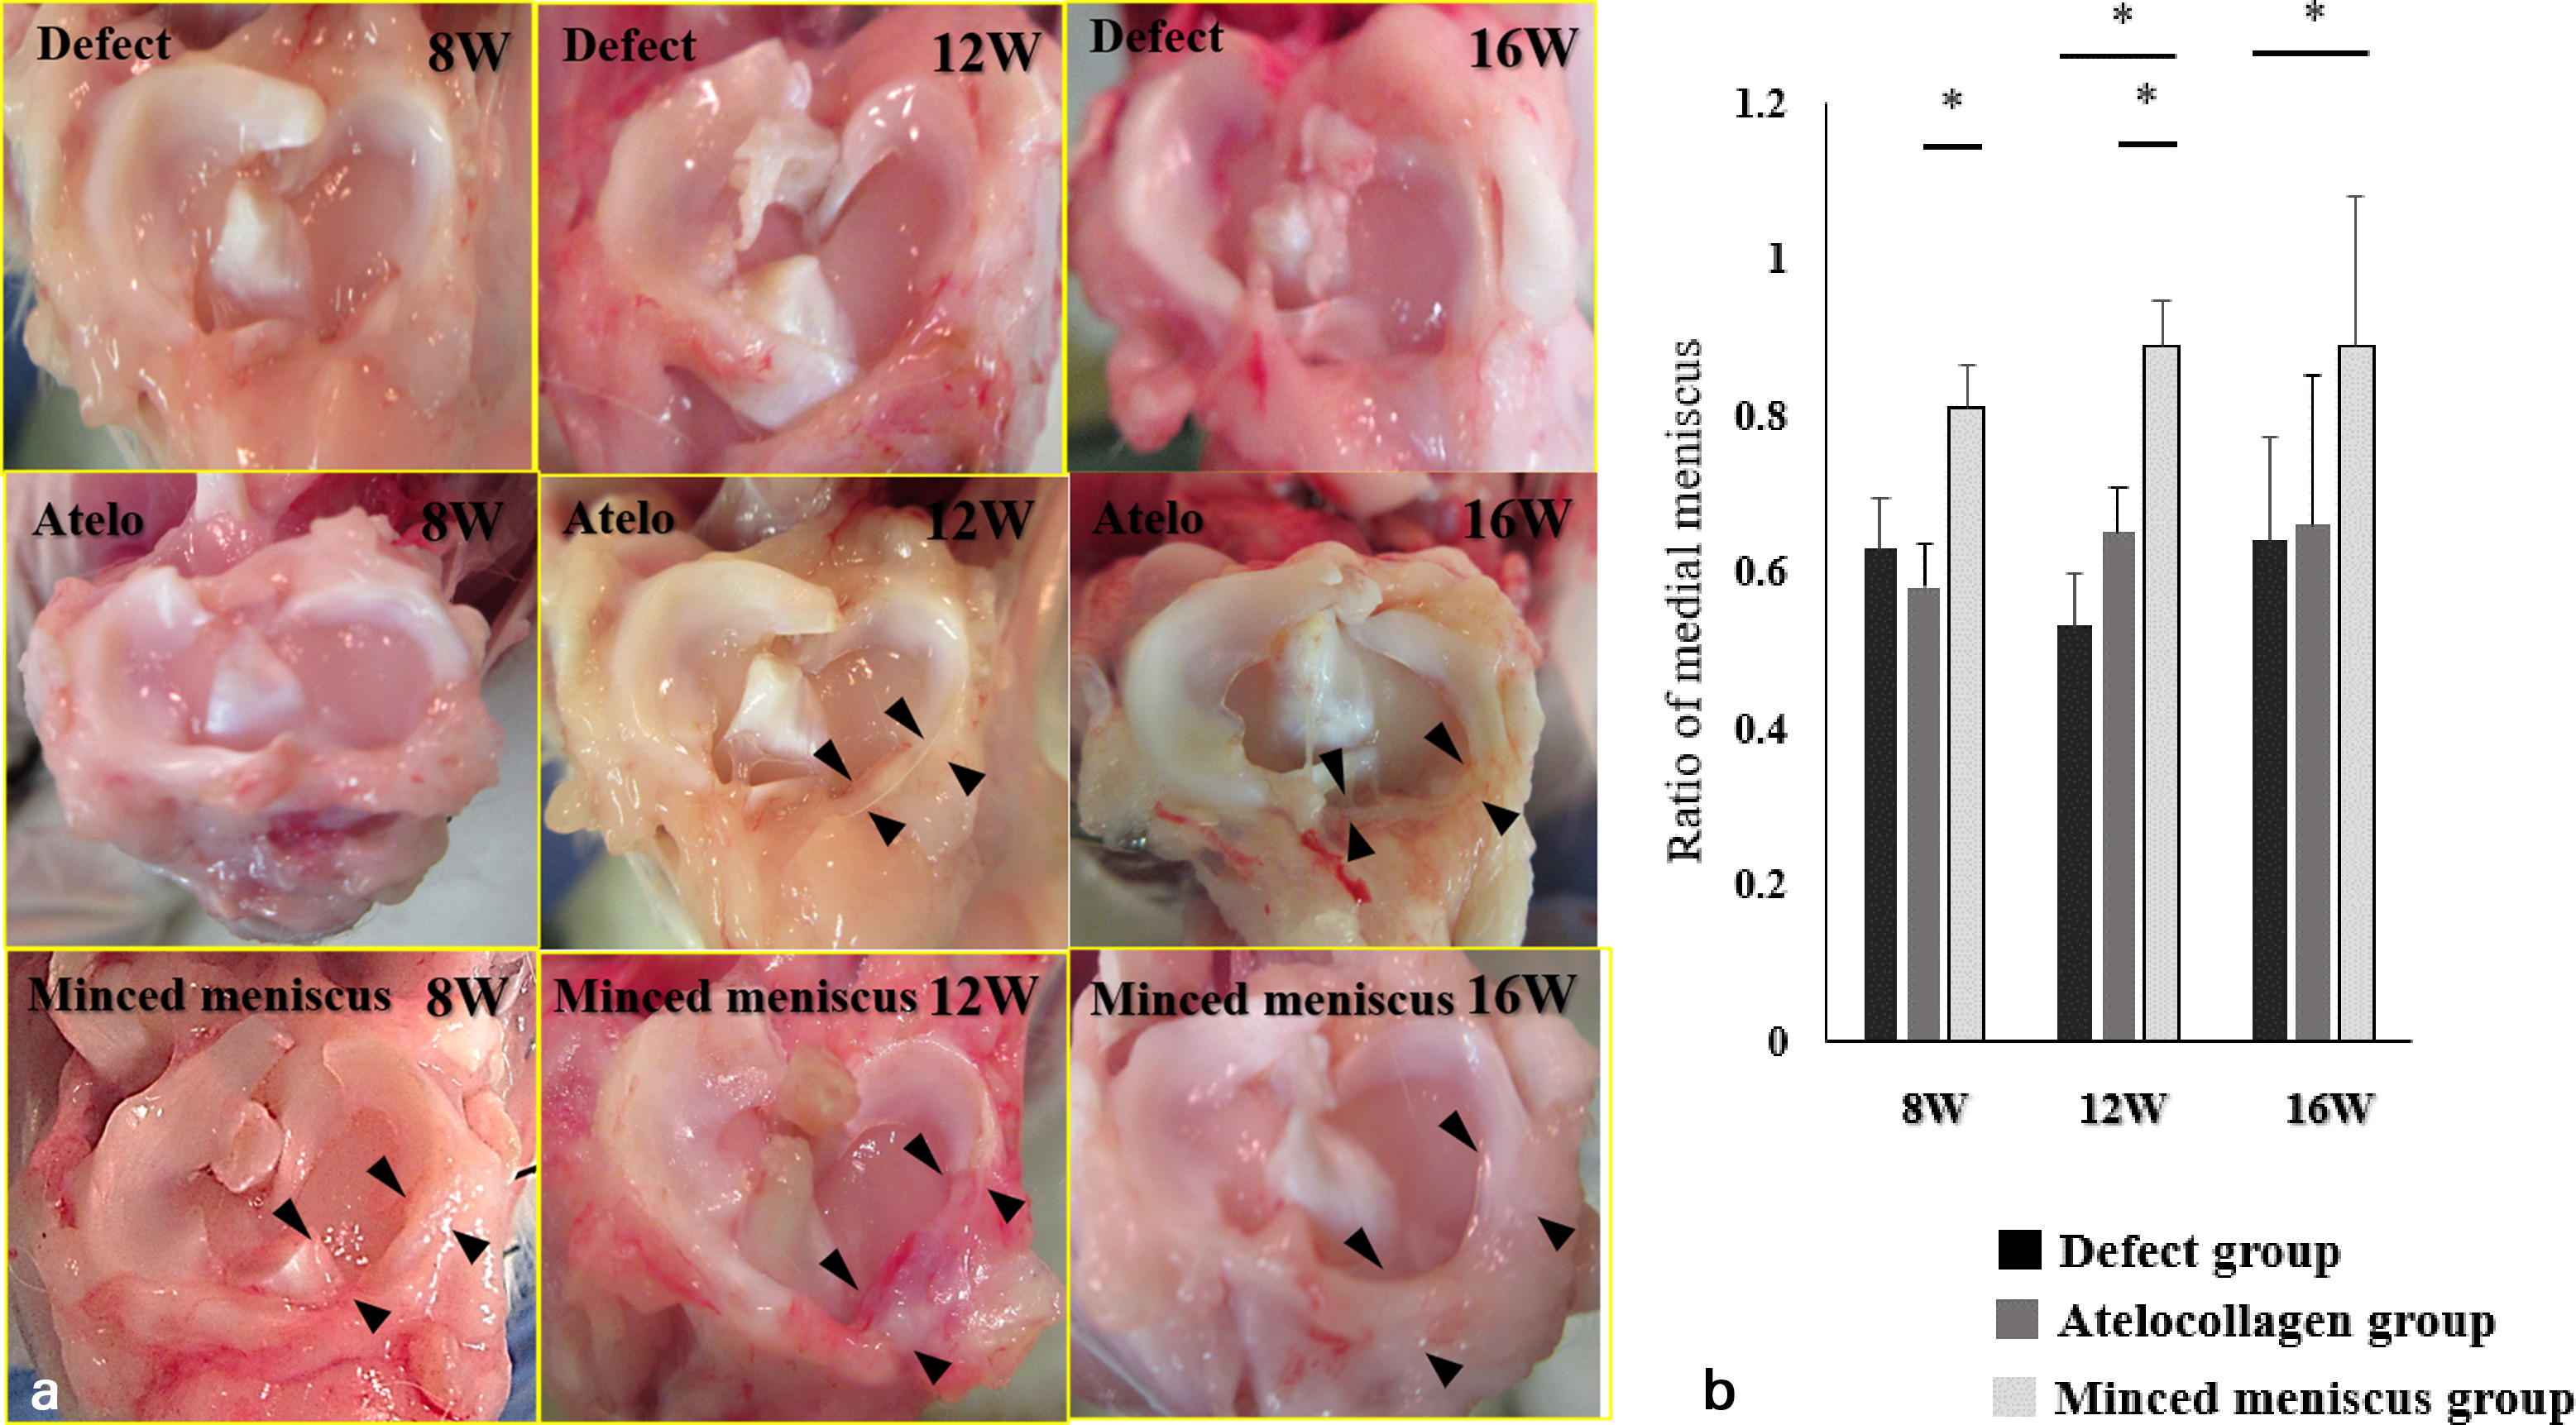 Fig. 3 
          a) Upper sections (defect groups). The scar tissue can be seen at eight weeks, although the tissues are incomplete. Middle sections represent the atelocollagen groups. Steady but thin tissues can be seen at 12 weeks. Lower sections represent minced meniscus groups. Steady and complete tissues can be seen at 16 weeks. Arrowheads indicate regenerated tissues. b) The percentage of the regenerated medial meniscus for both groups was defined as that of the area of the regenerated medial meniscus to the lateral meniscus. The percentages of medial minced meniscus are better in the minced meniscus groups than in the other groups (p = 0.011, p = 0.036, p = 0.043, and p = 0.026, respectively). *p < 0.05.
        